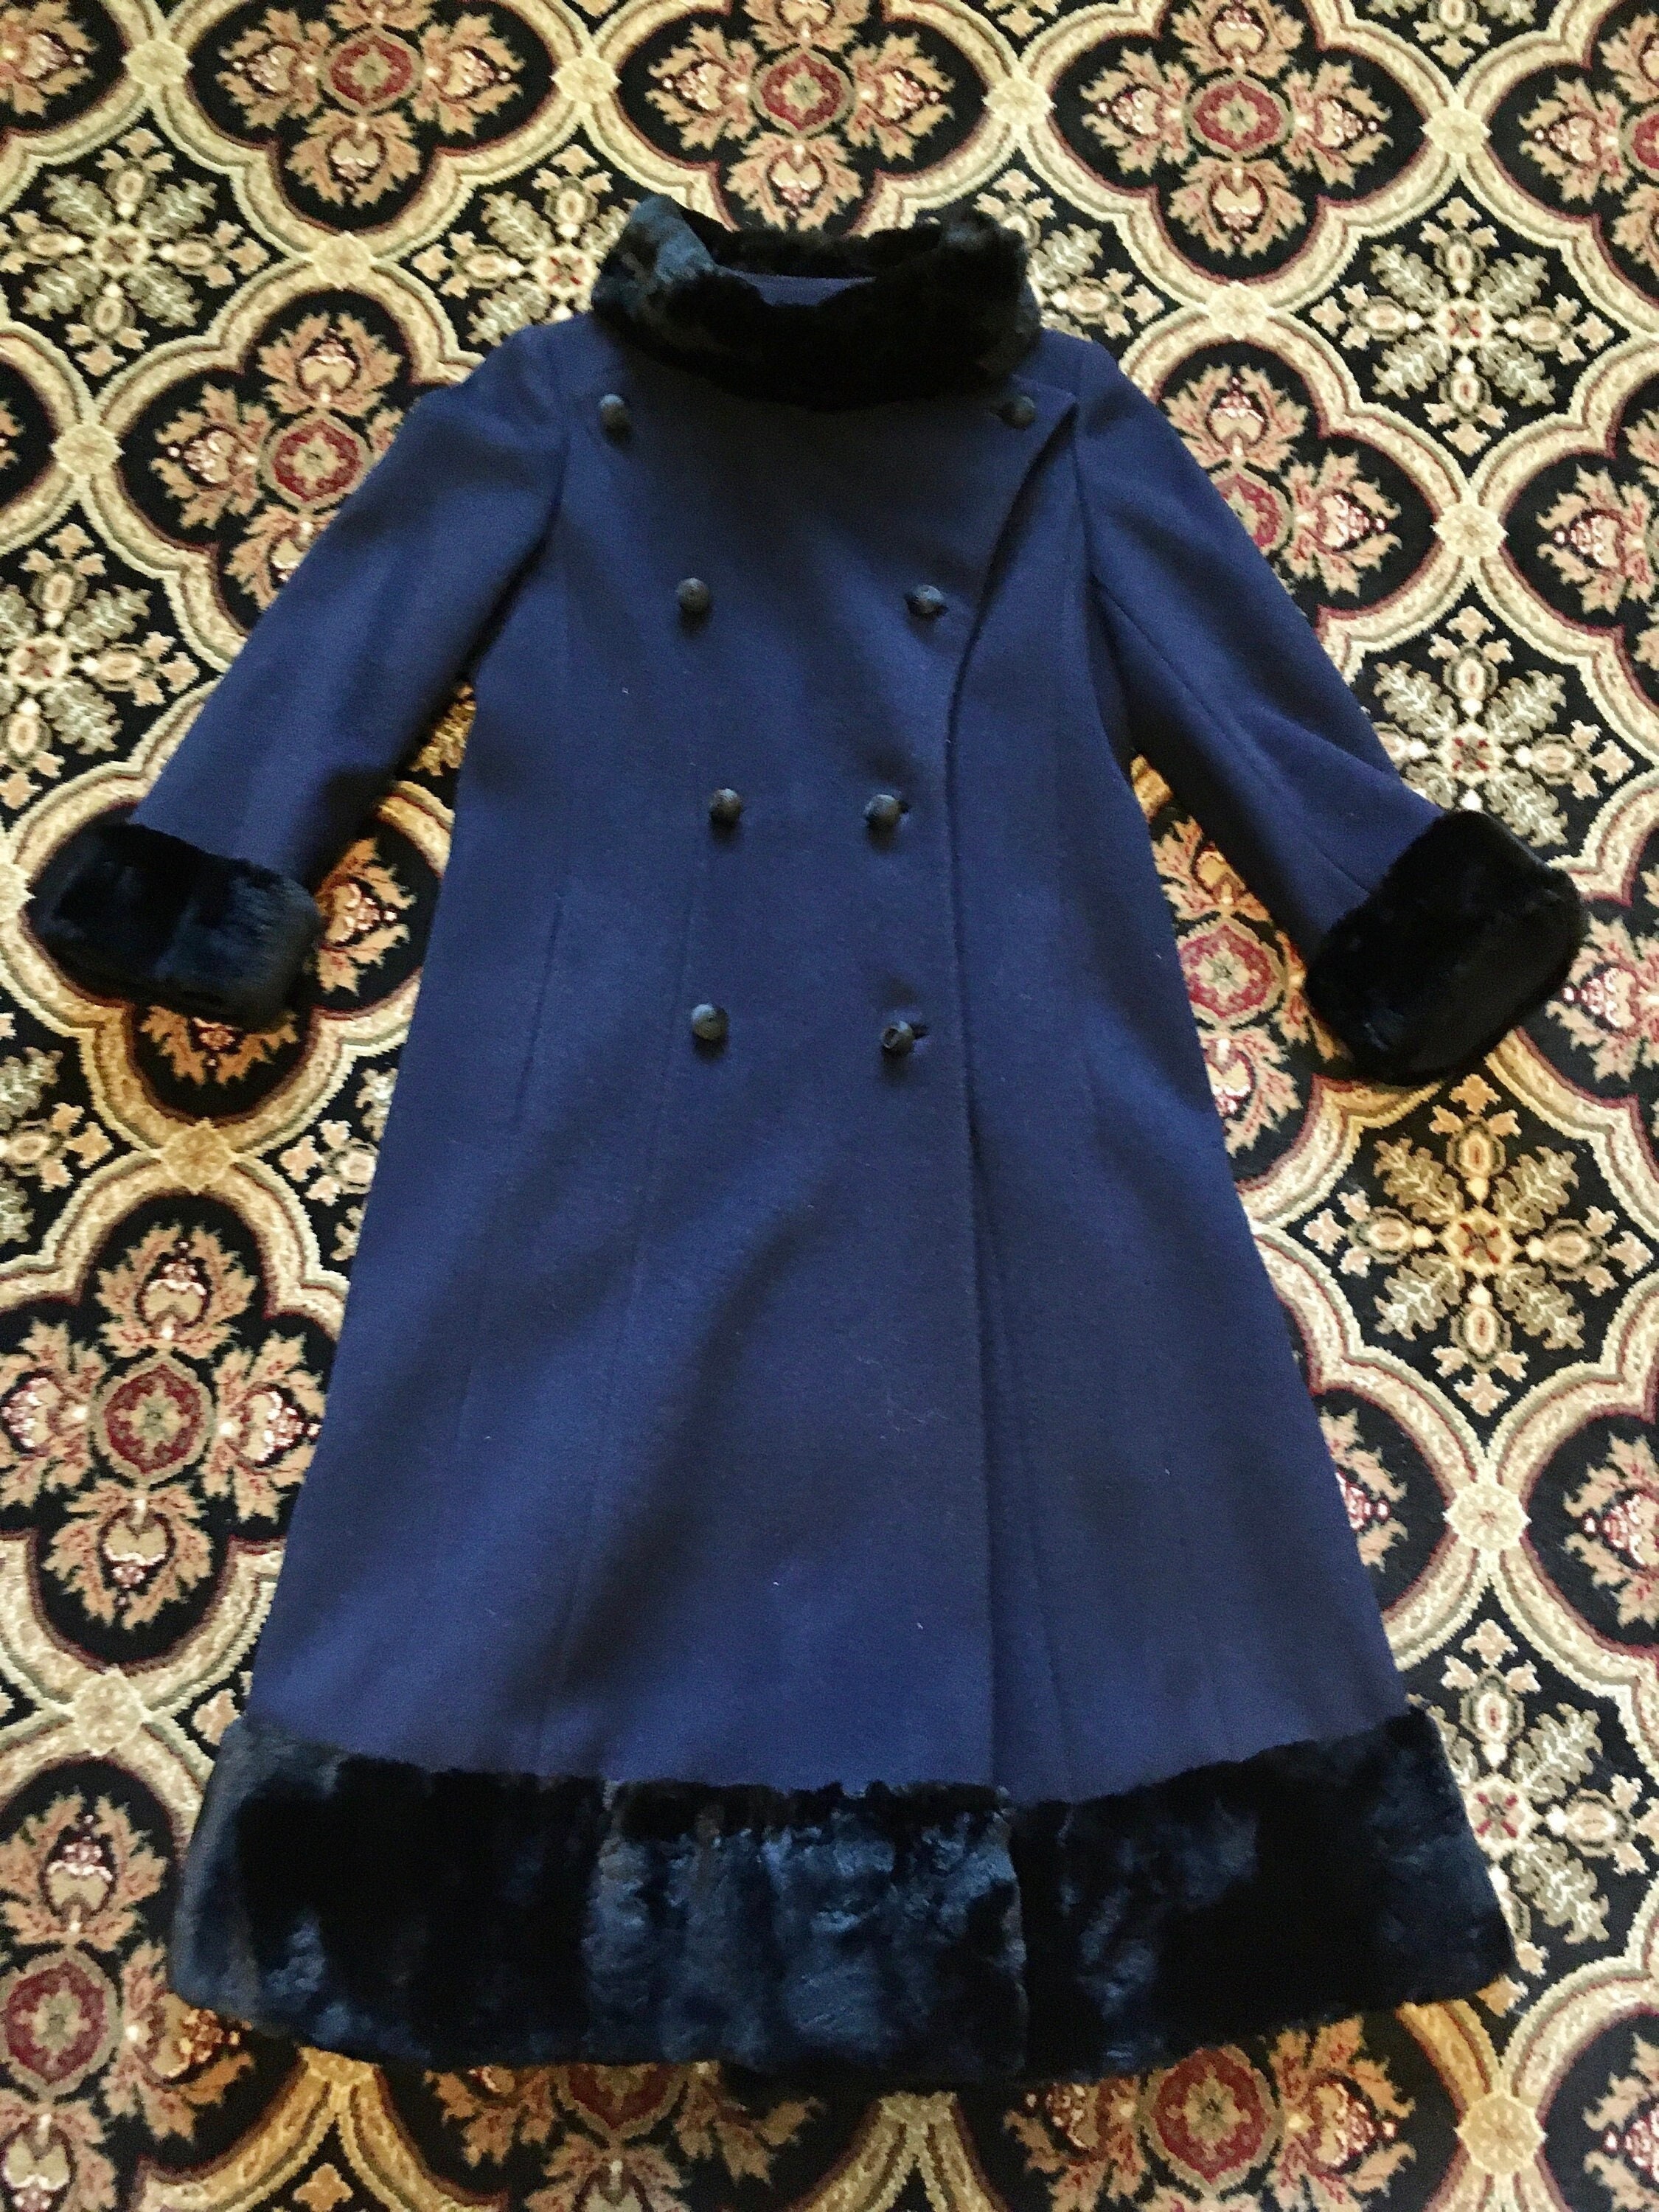 1950s Vintage Inspired Wool Coat, Wool Princess Coat, Blue Coat, Long Wool  Coat, Winter Coat, Wool Coat Women, Fit and Flare Coat 2407 